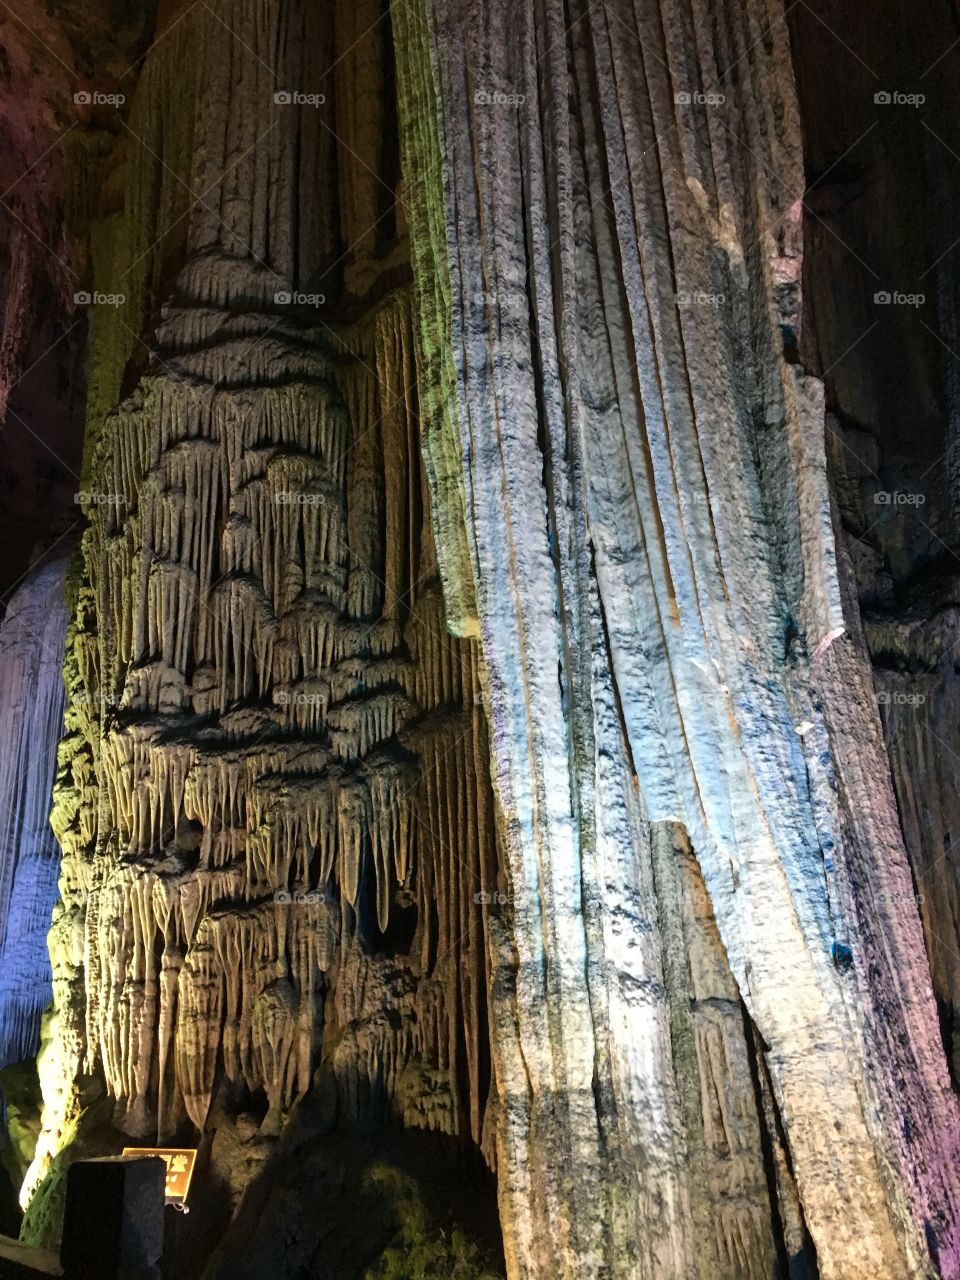 Karst caves in Guilin,The most famous of the two caves is Reed Flute Cave and Silver Cave.
